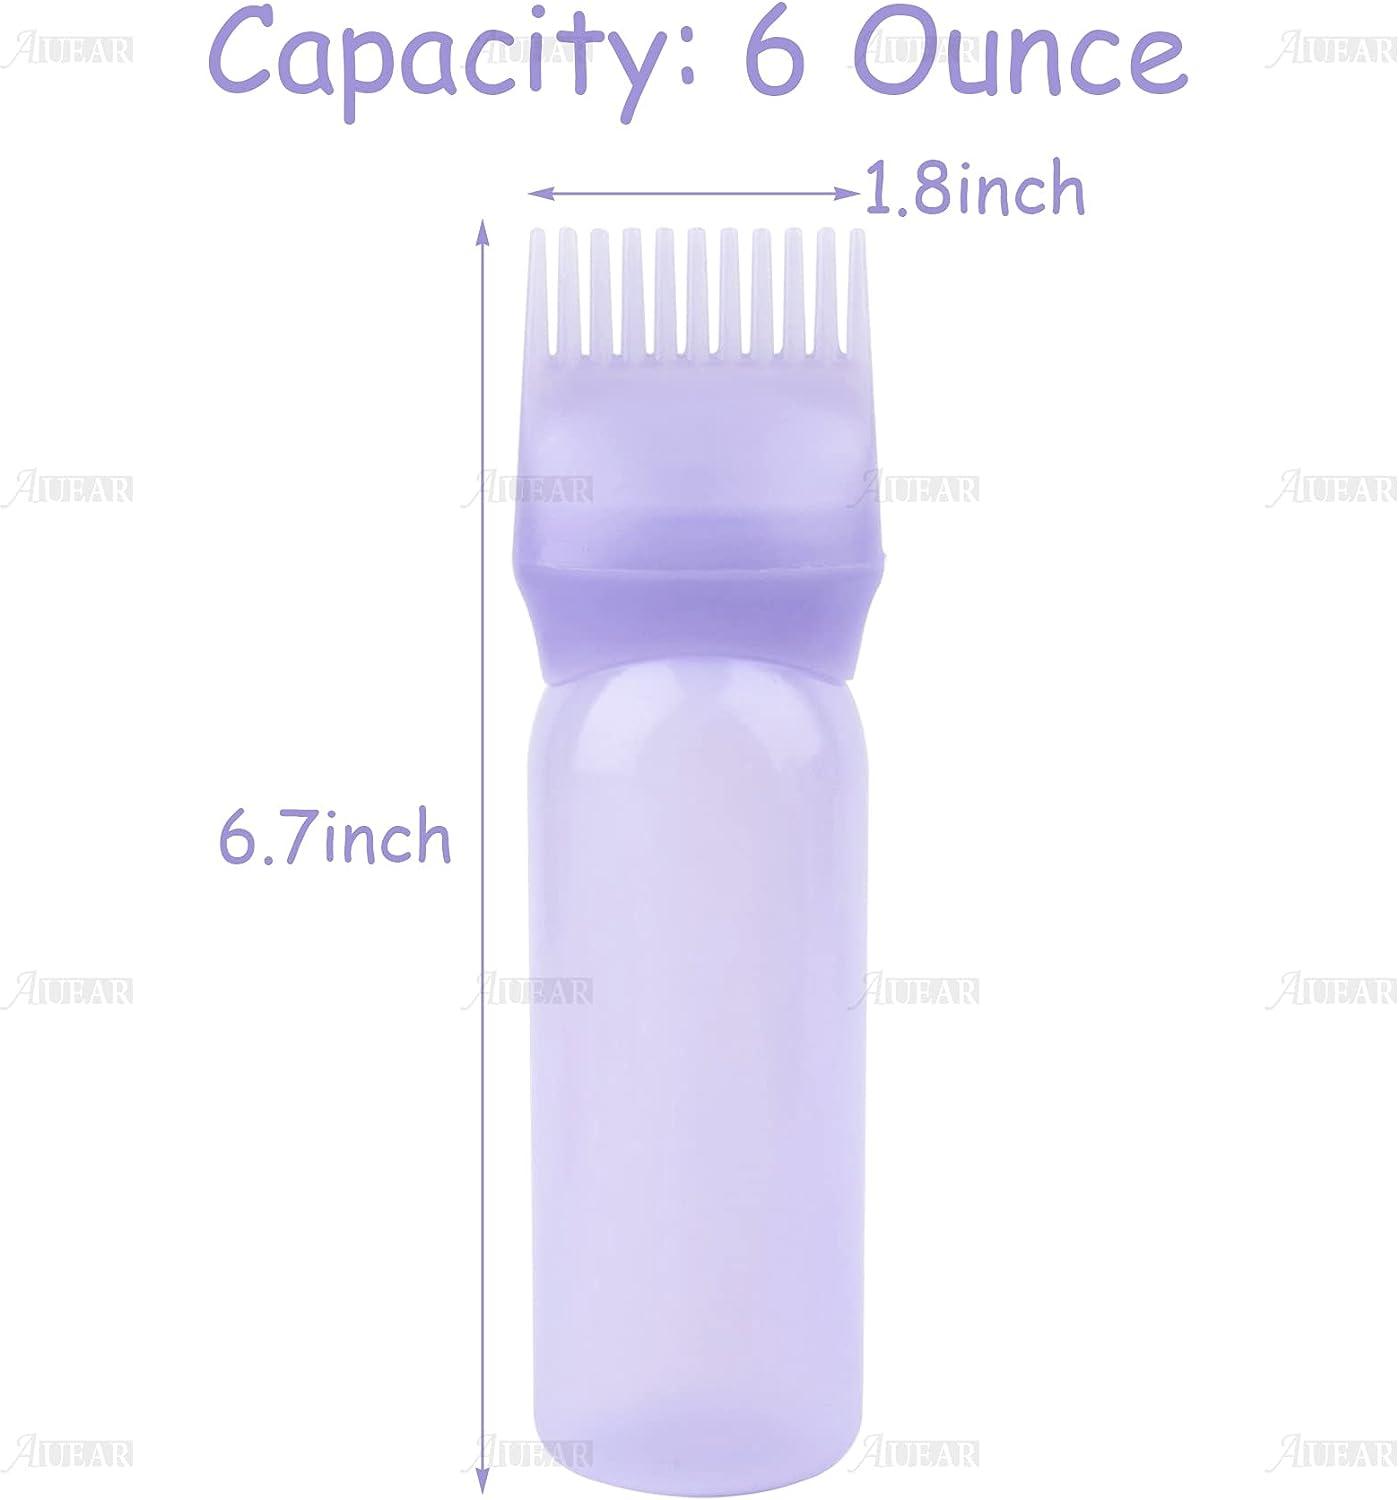  Root Comb Applicator Bottle 4 Ounce - Hair Oil Applicator 1/3  Pack Applicator Bottle For Hair Dye Bottle Applicator Brush With Graduated  Scale,Hair Coloring,Dye And Scalp Treatments : Beauty 